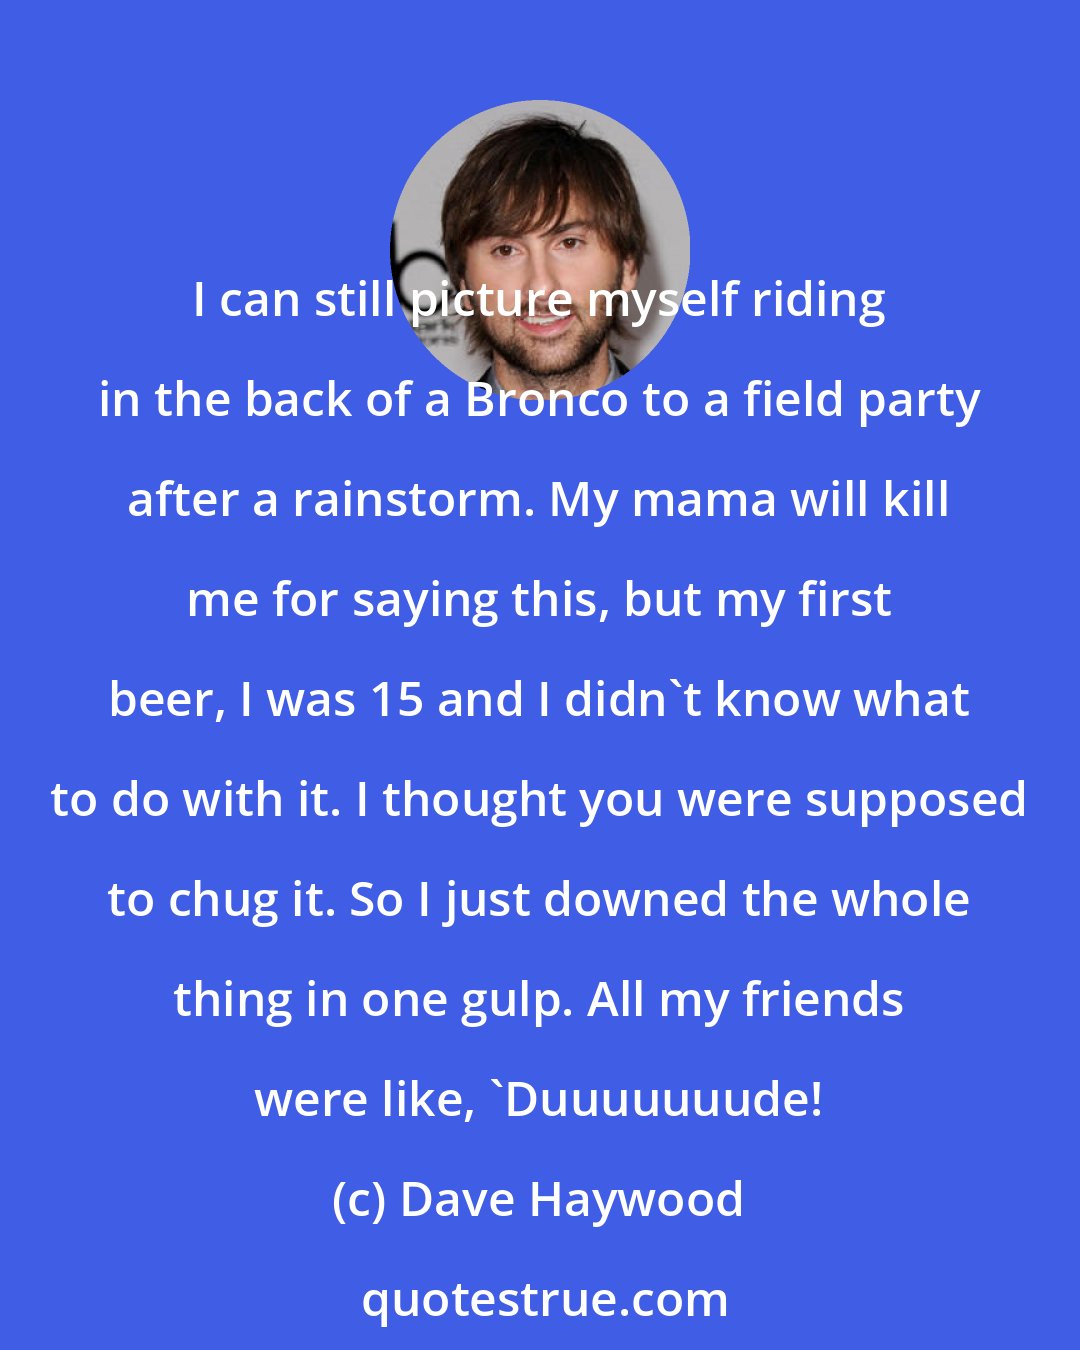 Dave Haywood: I can still picture myself riding in the back of a Bronco to a field party after a rainstorm. My mama will kill me for saying this, but my first beer, I was 15 and I didn't know what to do with it. I thought you were supposed to chug it. So I just downed the whole thing in one gulp. All my friends were like, 'Duuuuuuude!